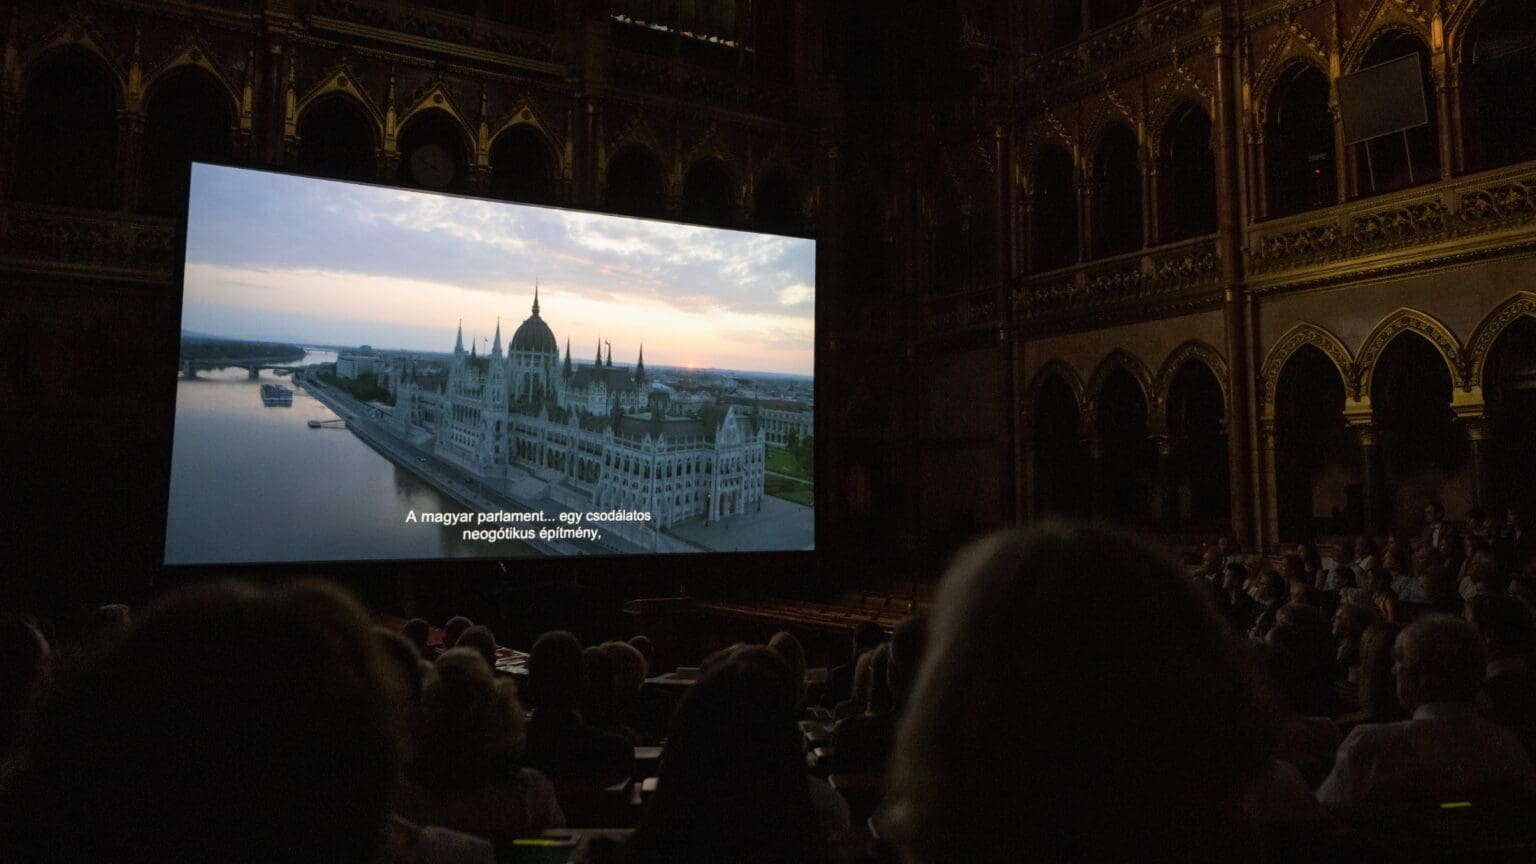 The House of the Nation Documentary Celebrates Hungarian Parliament’s 120th Anniversary